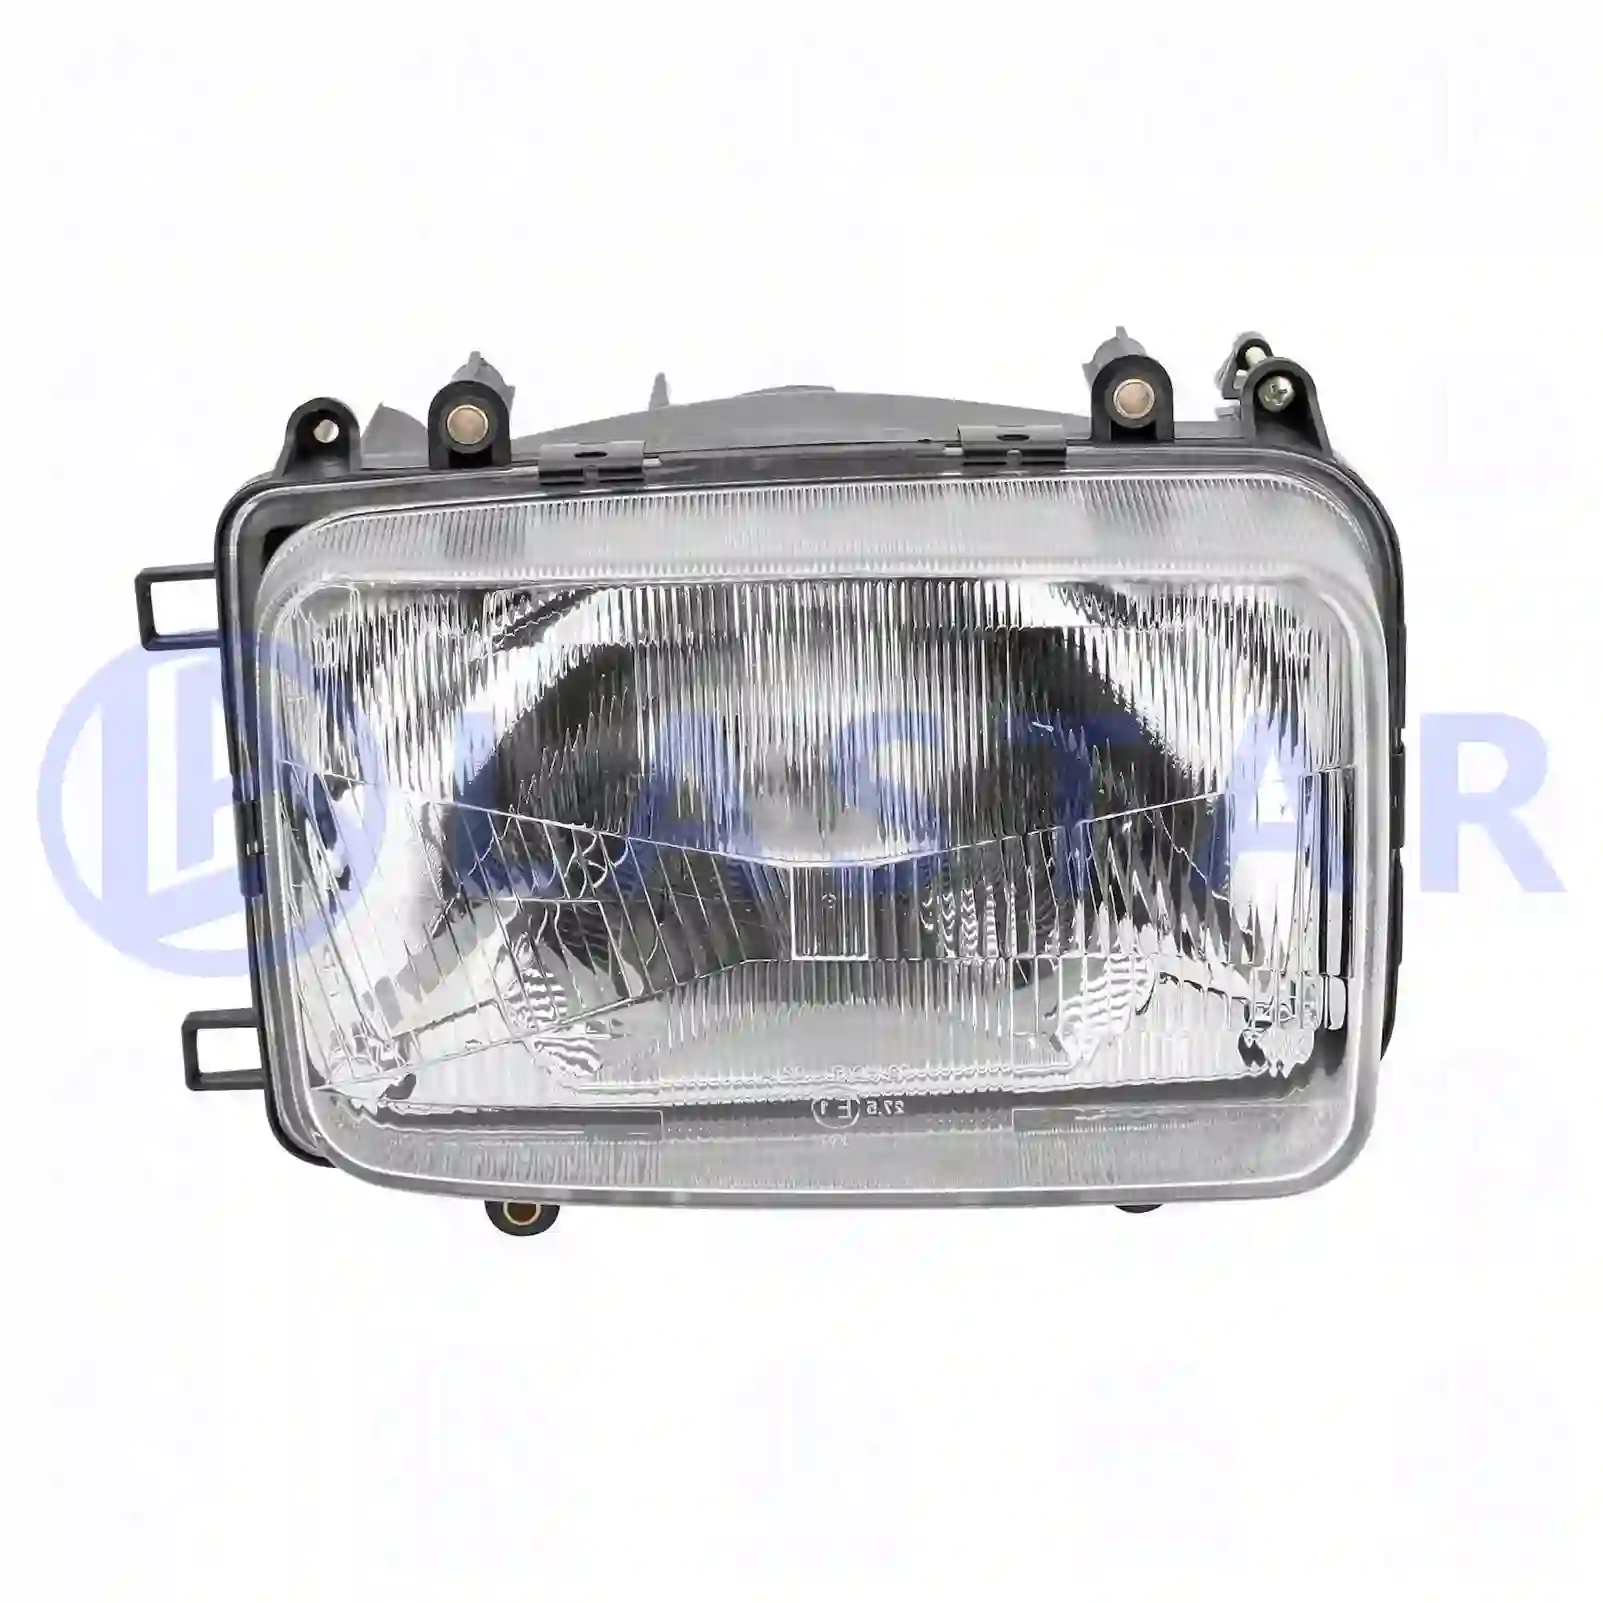 Headlamp, right, without bulbs, 77712555, 1227609, 1283232, 1293369, ZG20516-0008, ||  77712555 Lastar Spare Part | Truck Spare Parts, Auotomotive Spare Parts Headlamp, right, without bulbs, 77712555, 1227609, 1283232, 1293369, ZG20516-0008, ||  77712555 Lastar Spare Part | Truck Spare Parts, Auotomotive Spare Parts